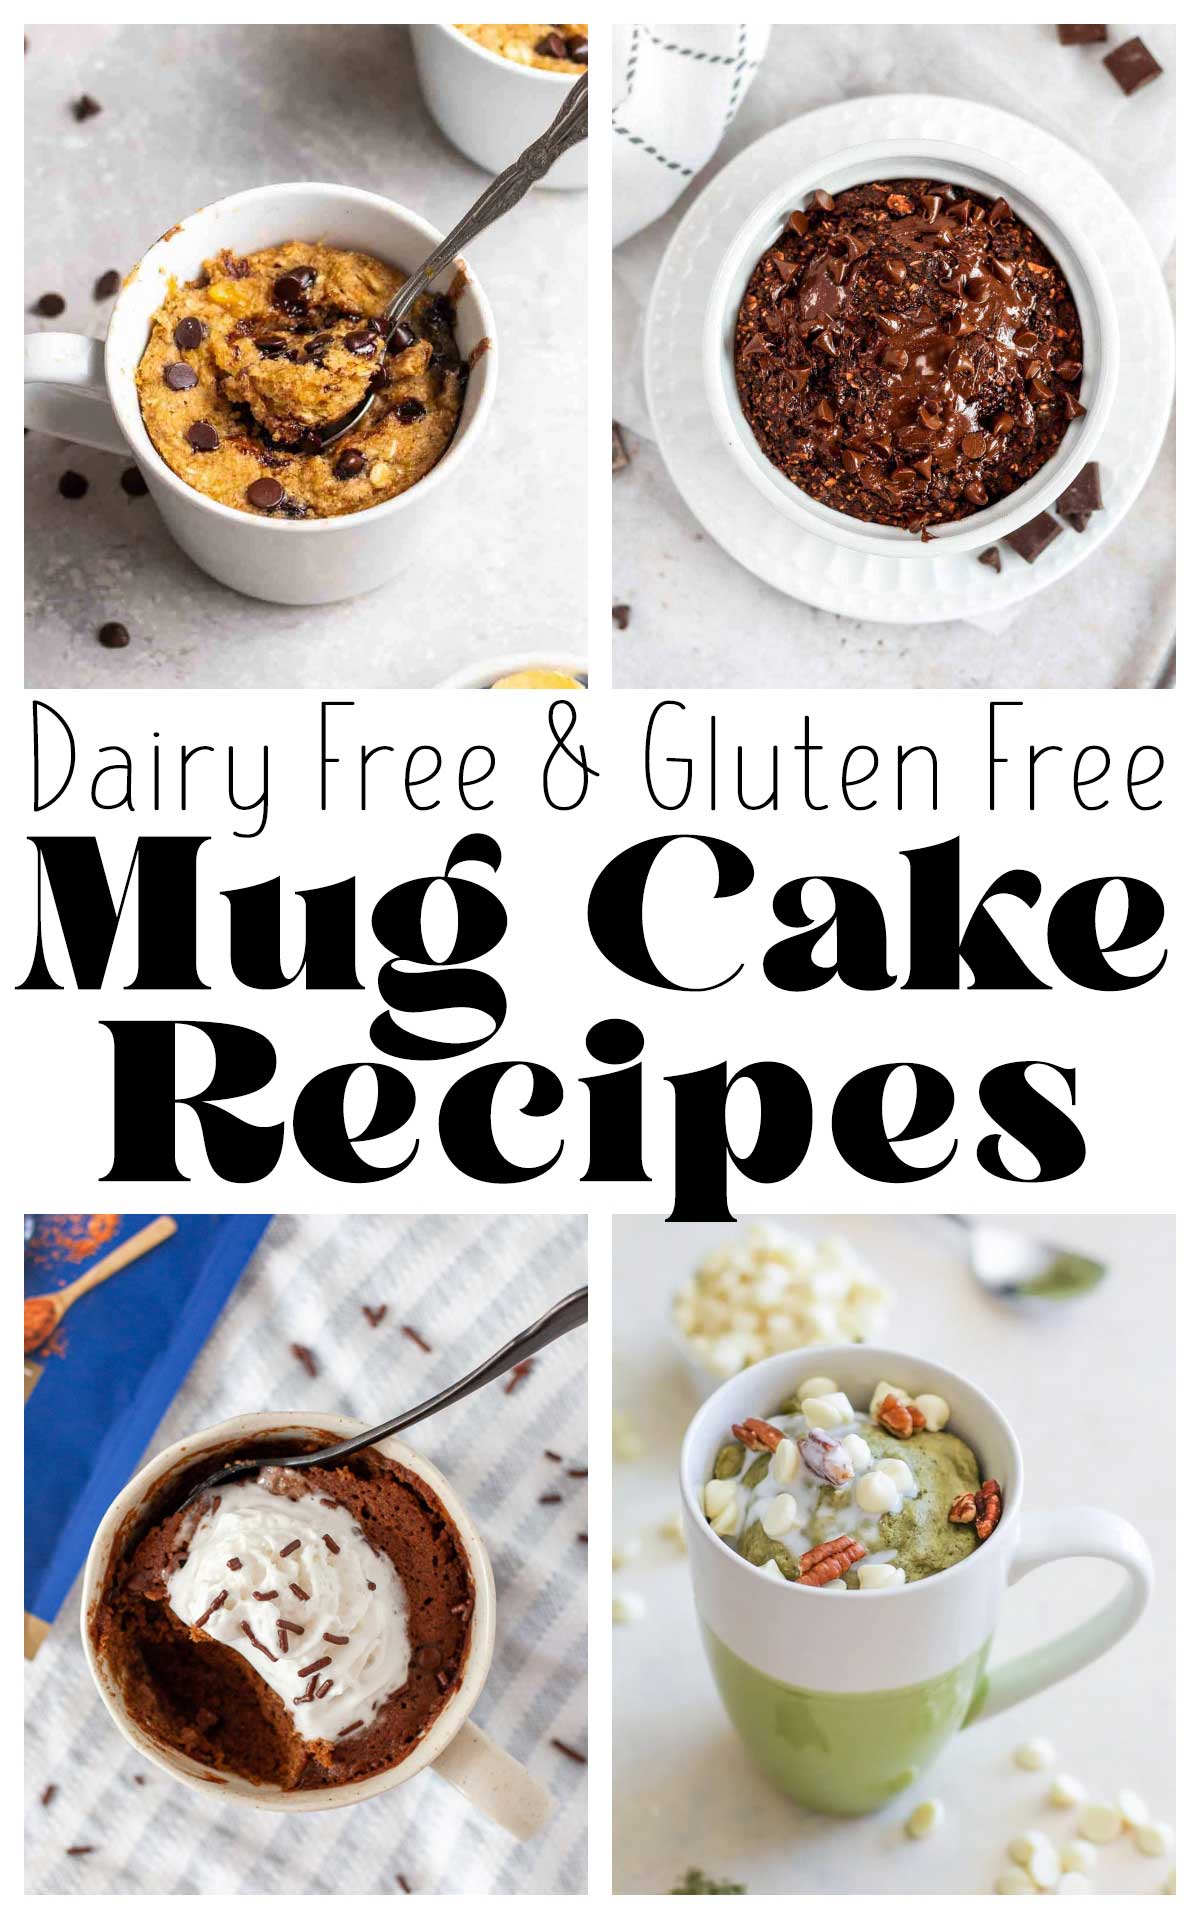 photo collage of 4 kinds of mug cakes with text overlay. 